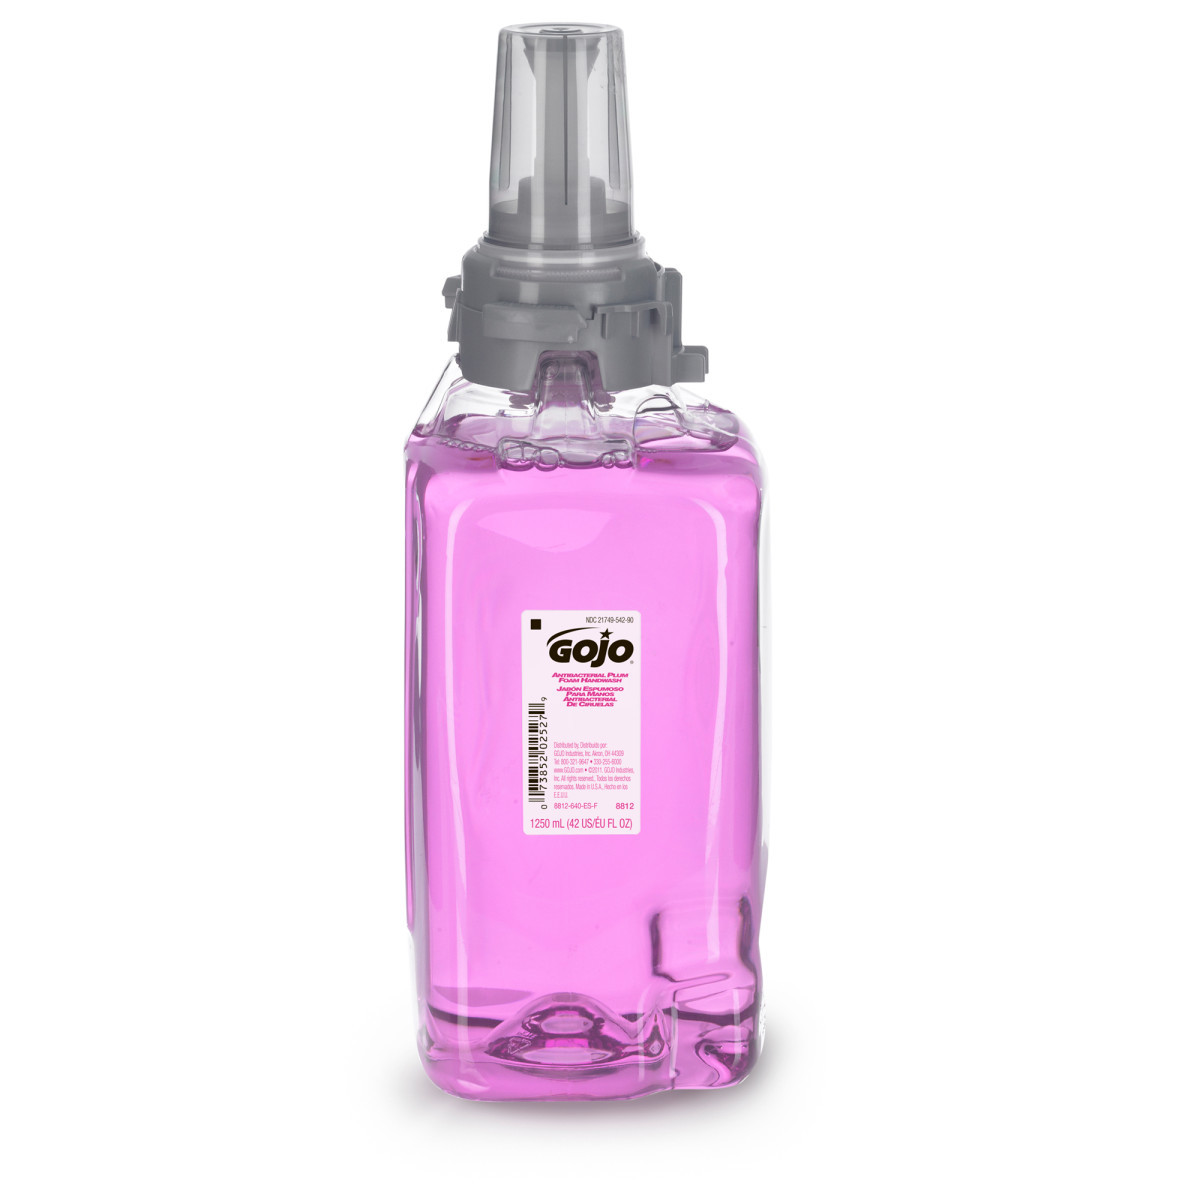 GOJO® 1250 mL Refill Purple Plum Scented Hand Soap (Availability restrictions apply.)